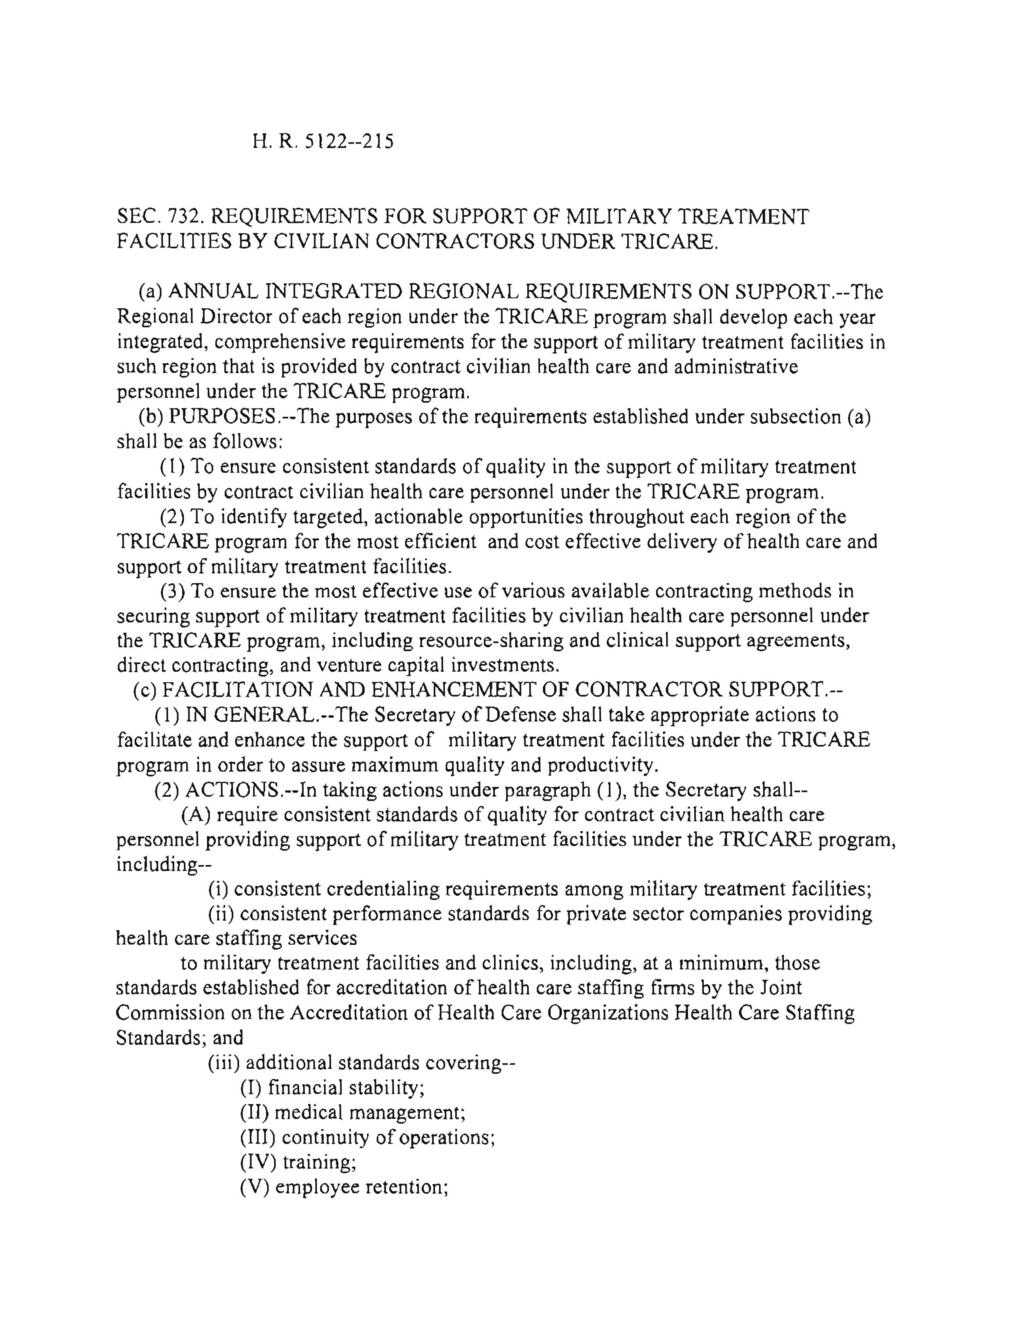 H. R. 5 l 22--215 SEC. 732. REQUIREMENTS FOR SUPPORT OF MILITARY TREATMENT FACILITIES BY CIVILIAN CONTRACTORS UNDER TRICARE. (a) ANNUAL INTEGRATED REGIONAL REQUIREMENTS ON SUPPORT.